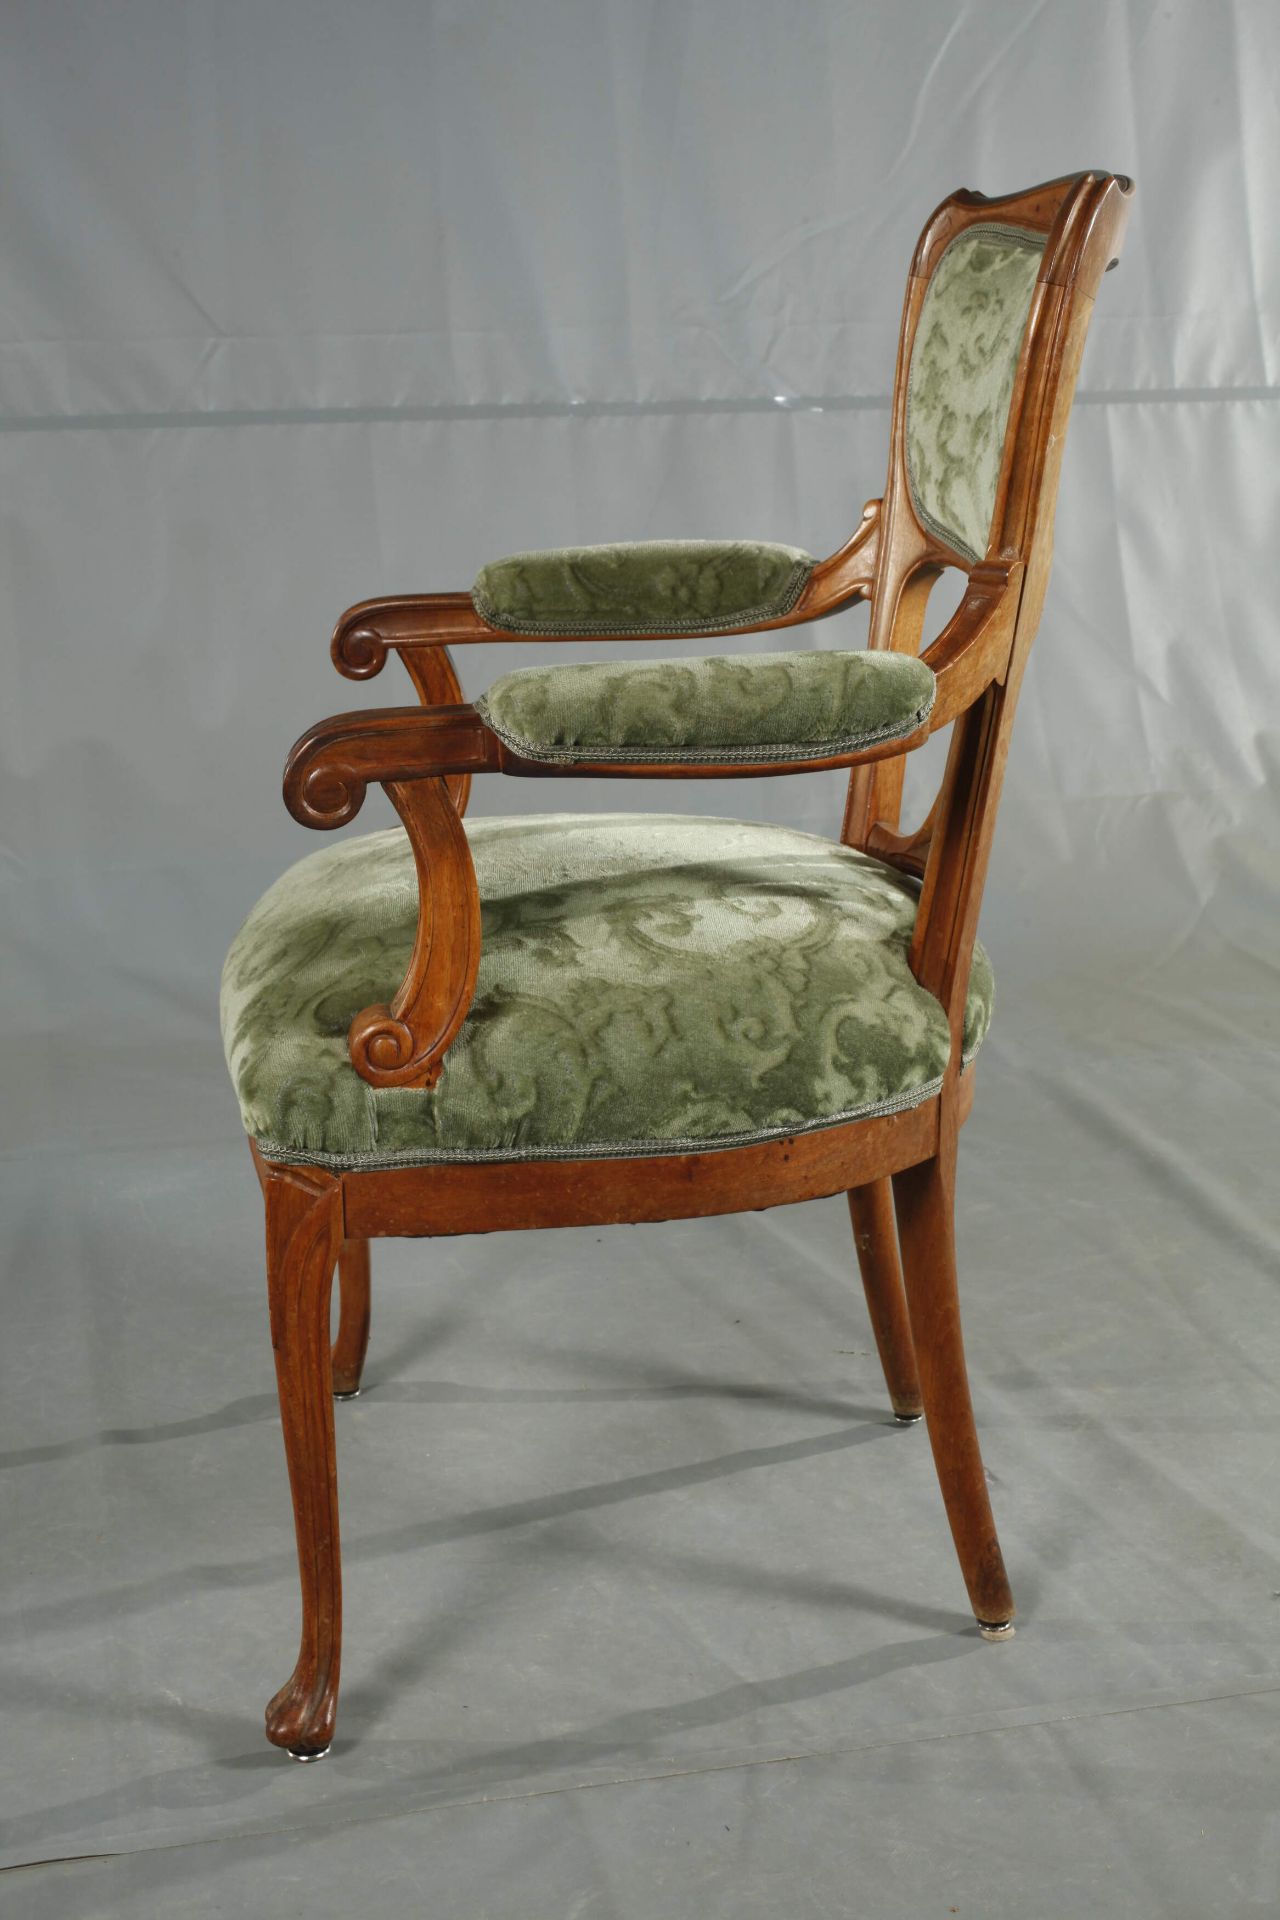 Large Art Nouveau seating group - Image 3 of 12